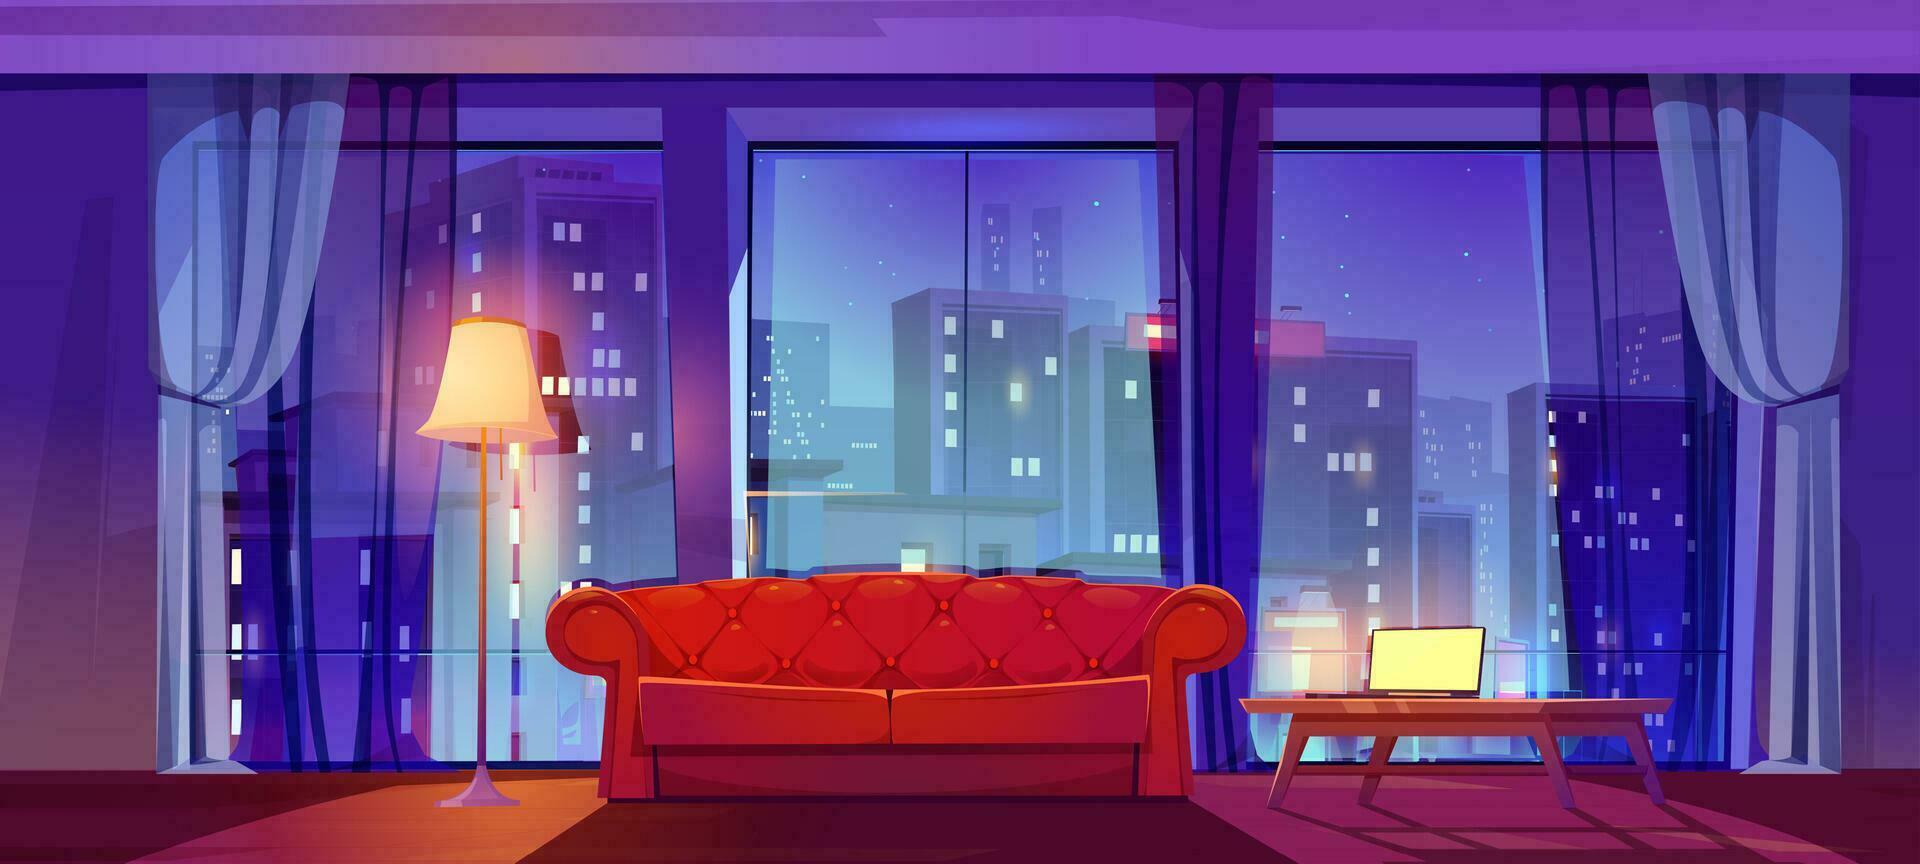 Cartoon living room interior with night city view vector